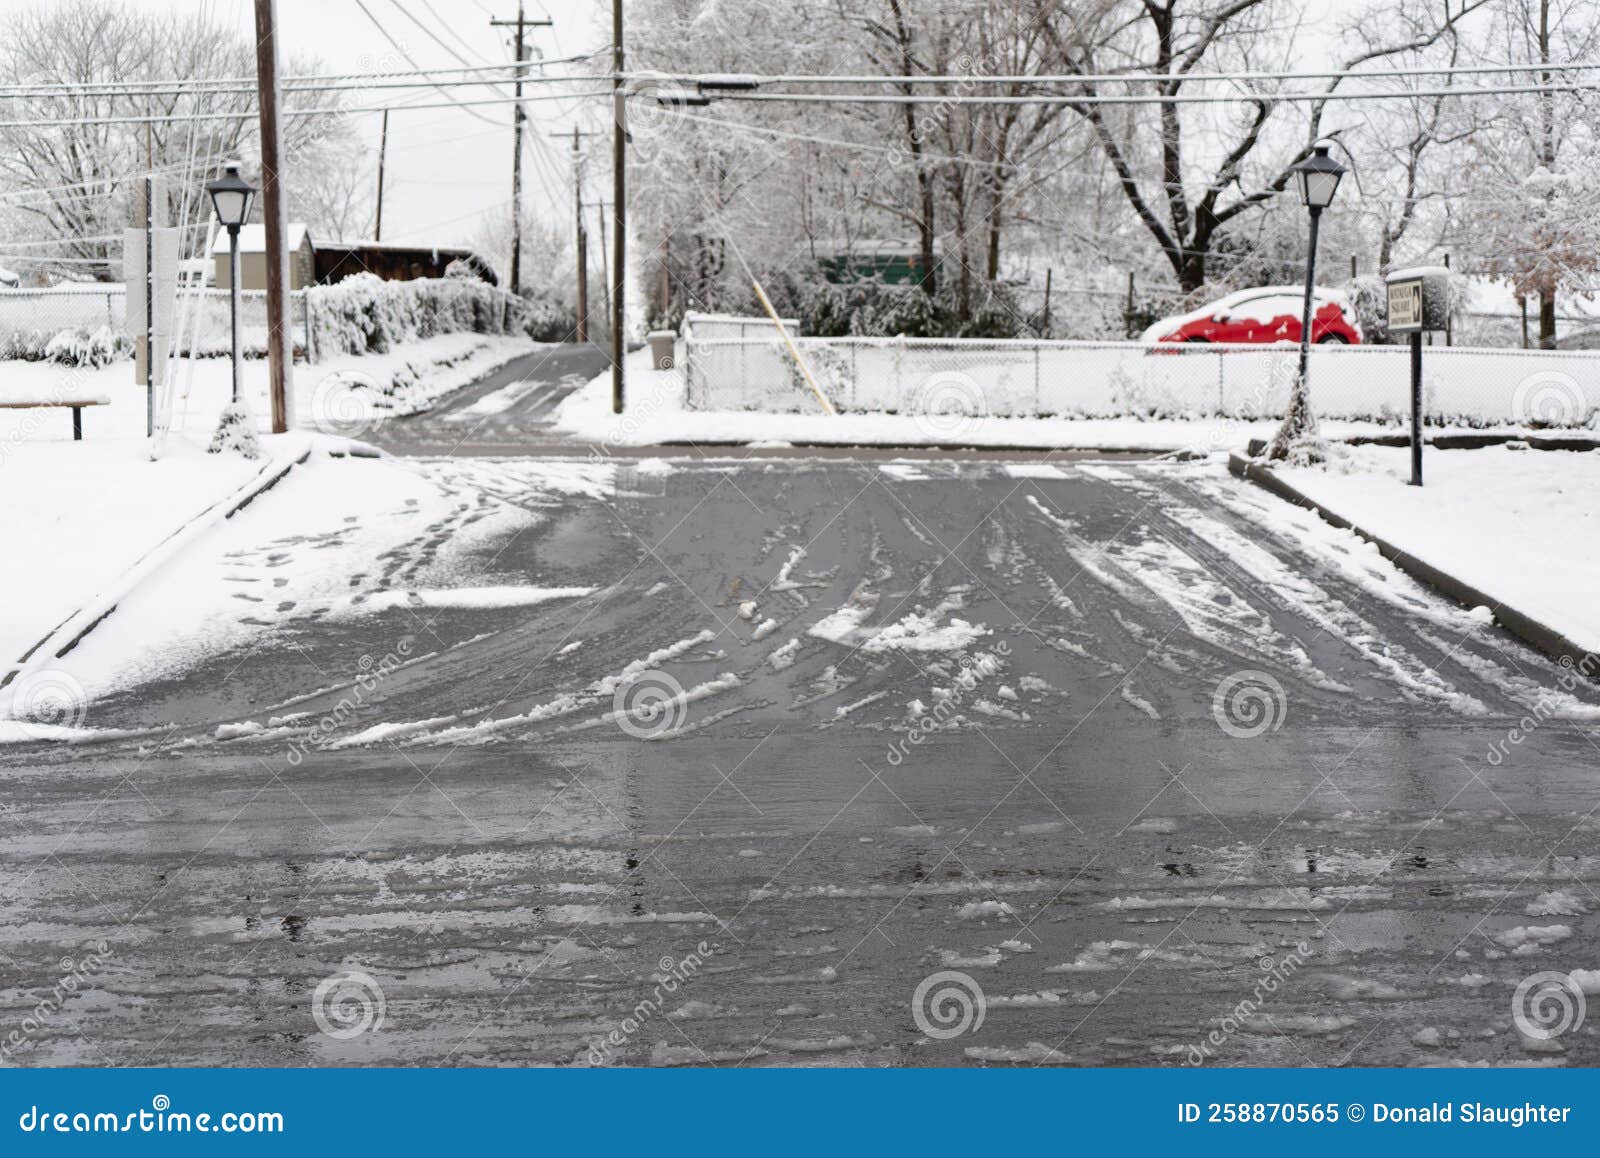 Driveway after Snow Removal Editorial Image - Image of equipment ...